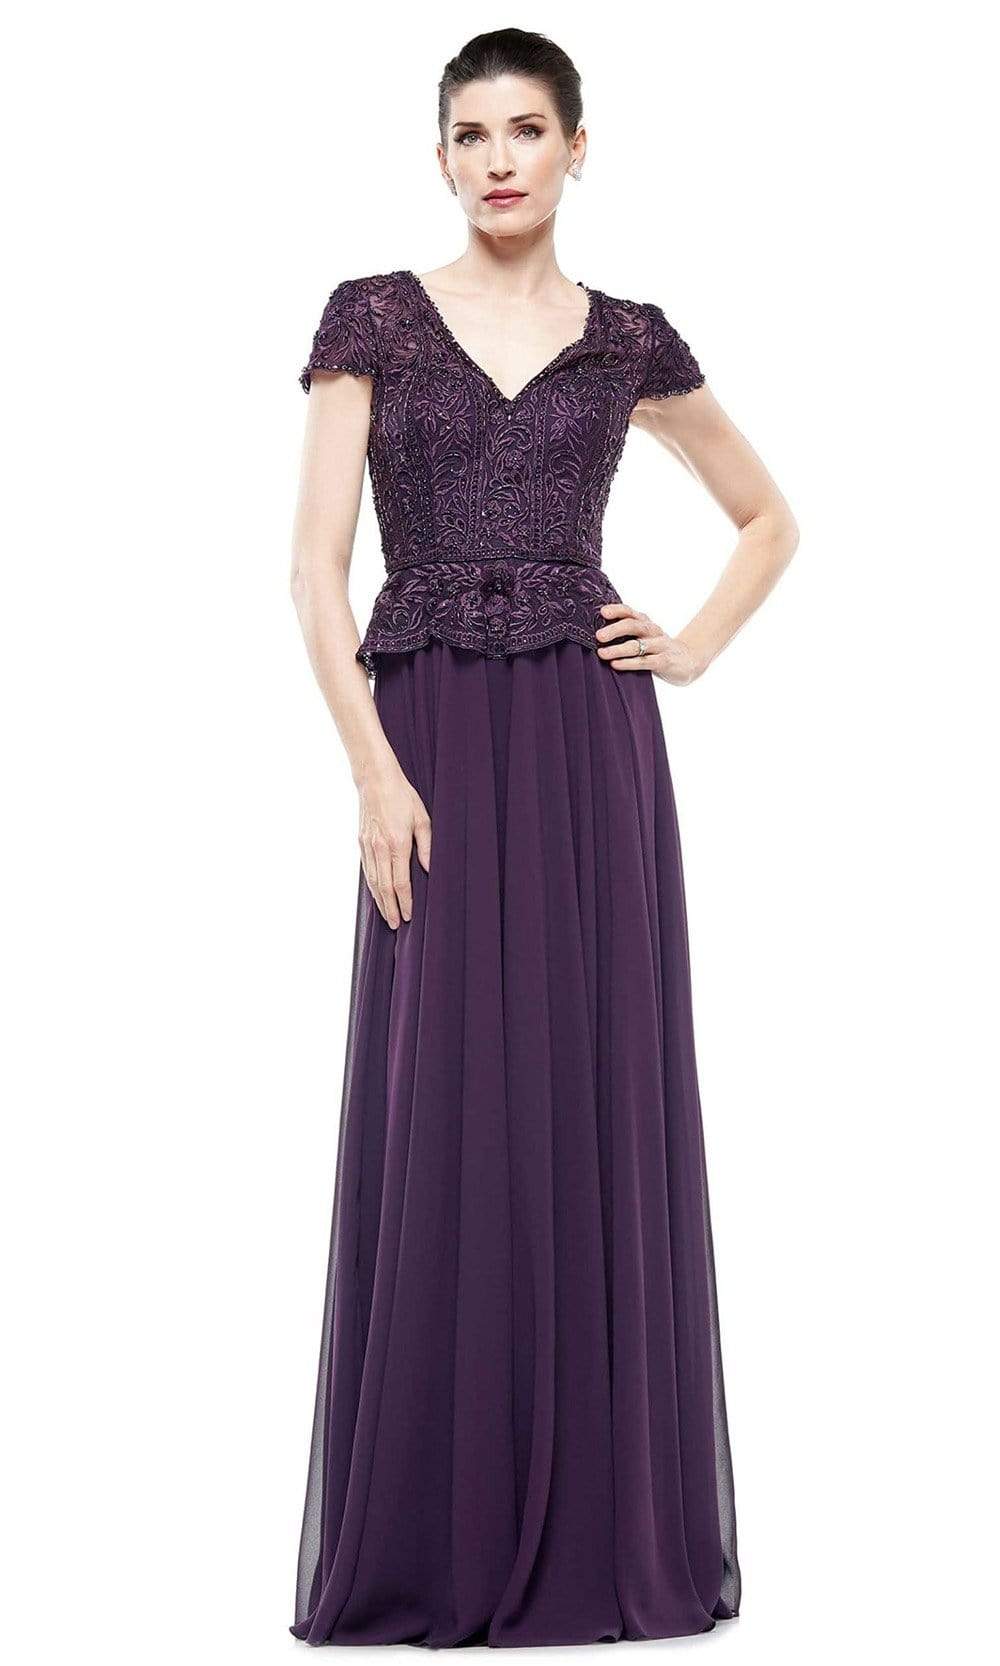 Image of Marsoni by Colors - M243 Short Sleeve Embroidered Peplum Chiffon Gown